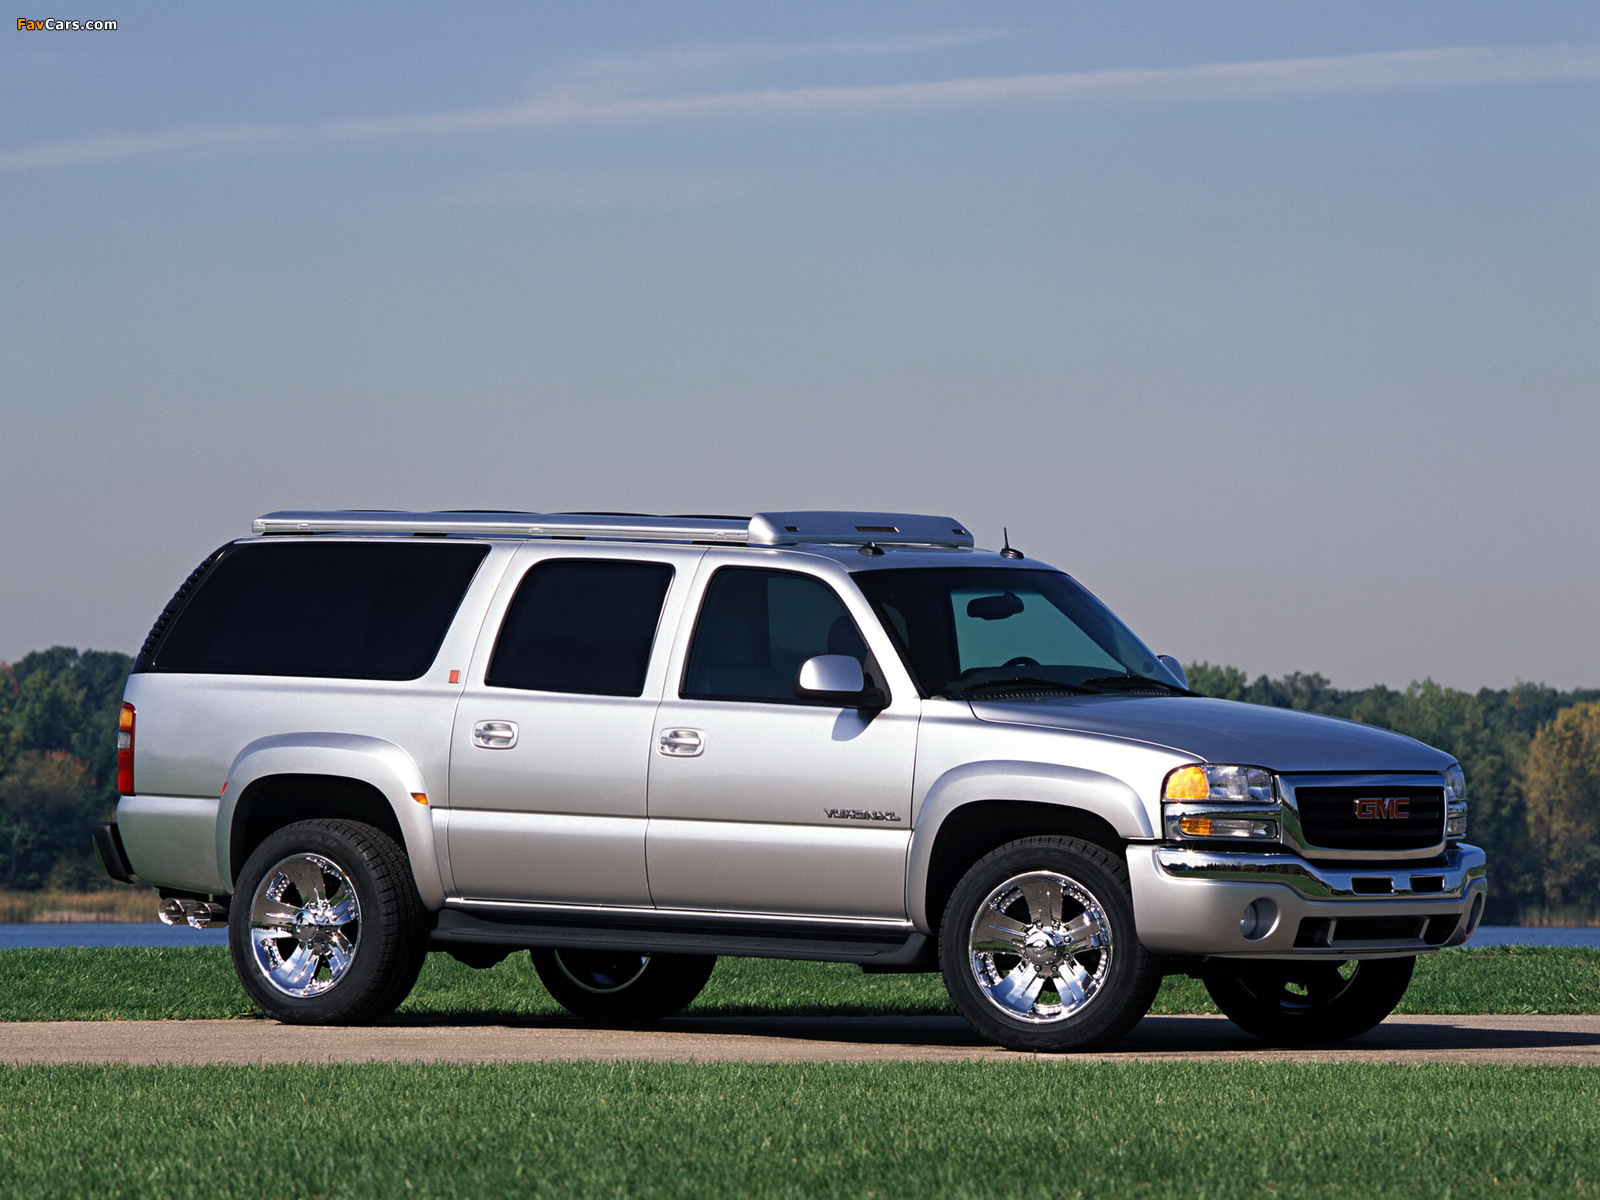 Pictures of GMC Yukon XL Outdoor Living Pro Concept 2004 (1600 x 1200)